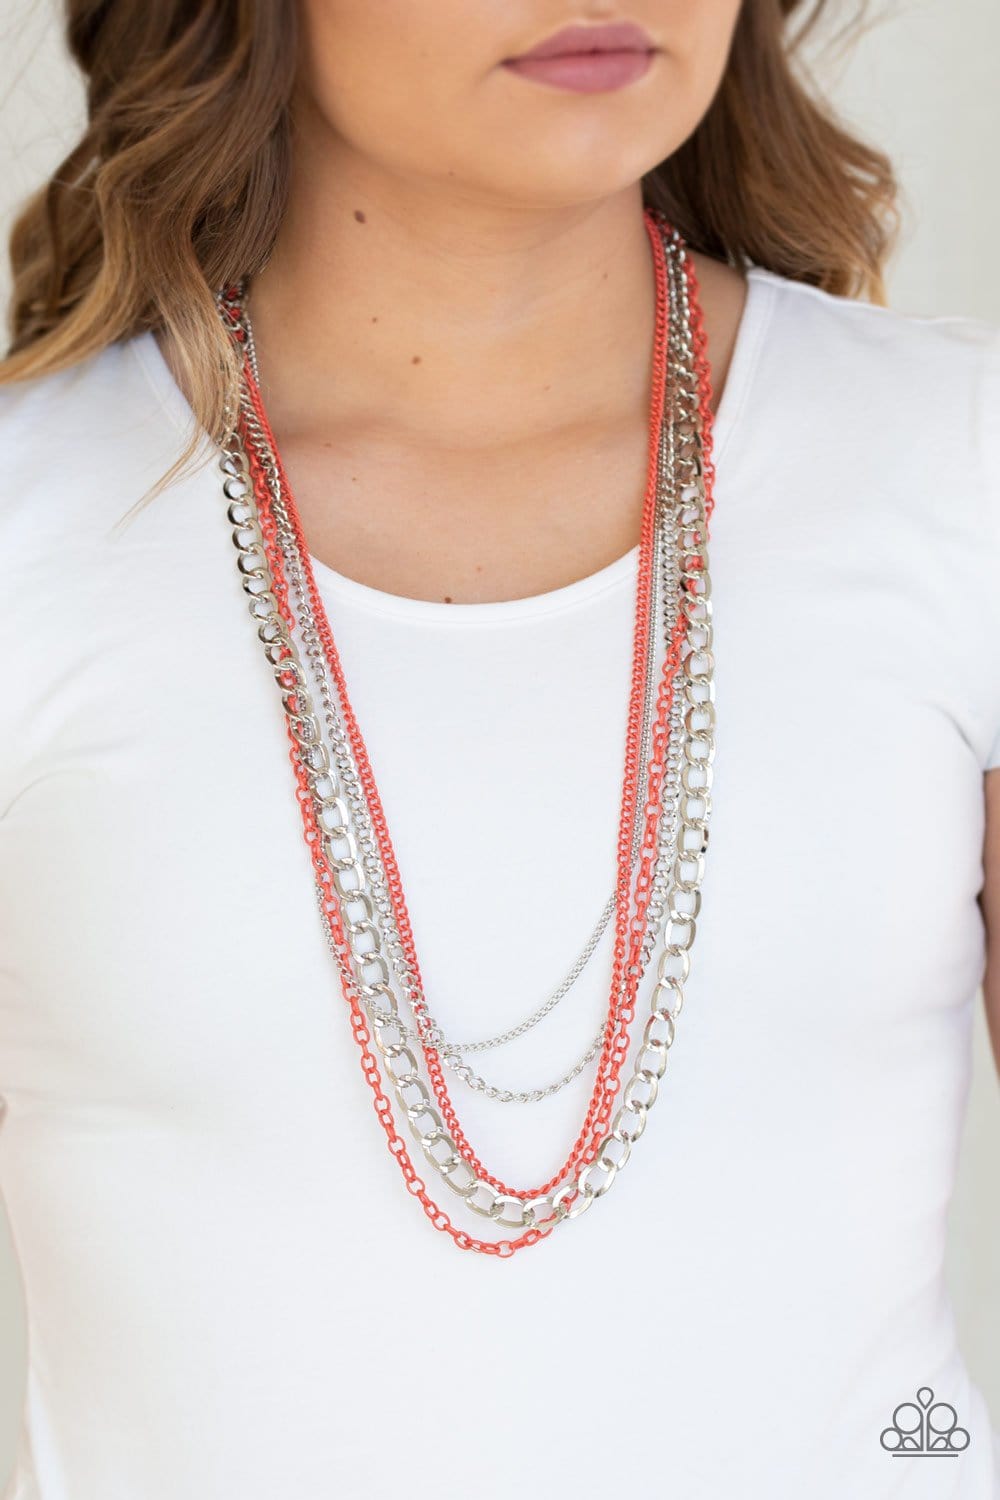 Paparazzi: Industrial Vibrance - Orange Chain Necklace - Jewels N’ Thingz Boutique